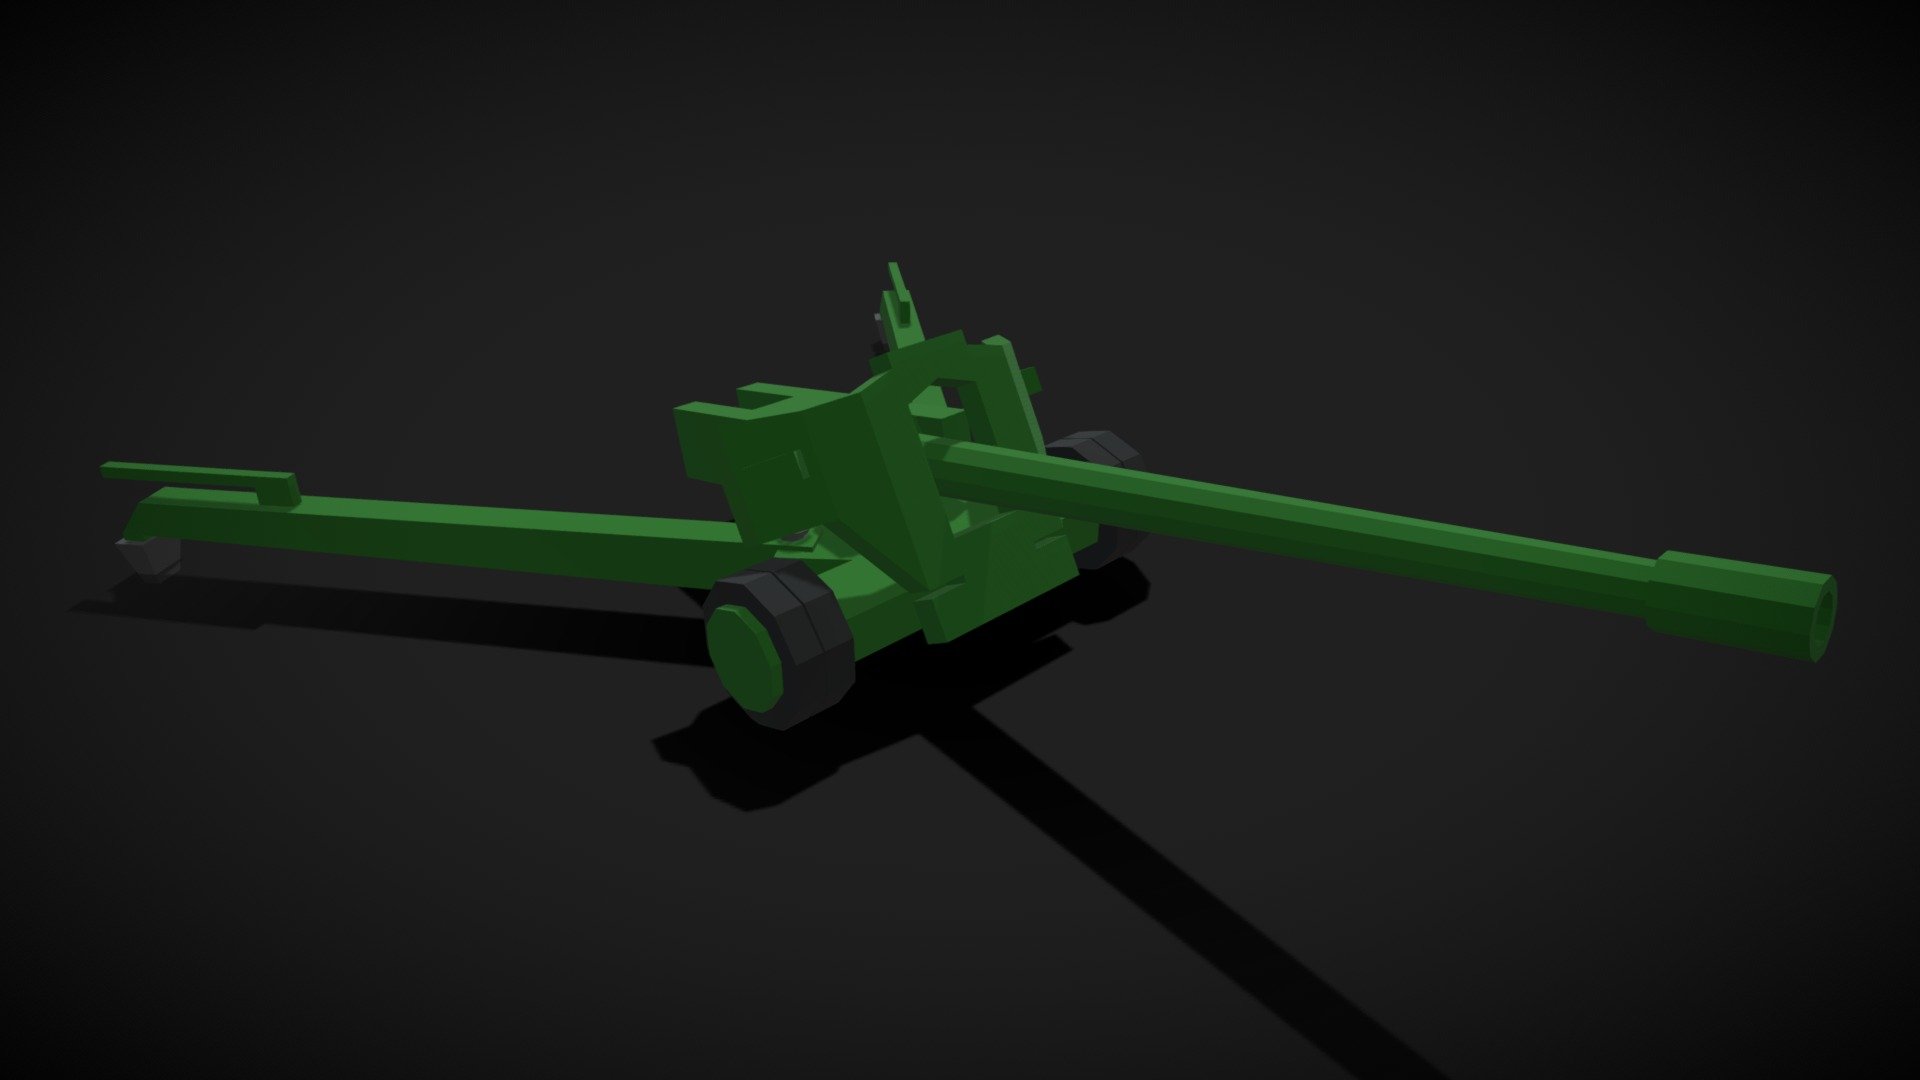 This is a historic anti aircraft gun. Used in World War 2. You could use it for your next game if you like 3d model